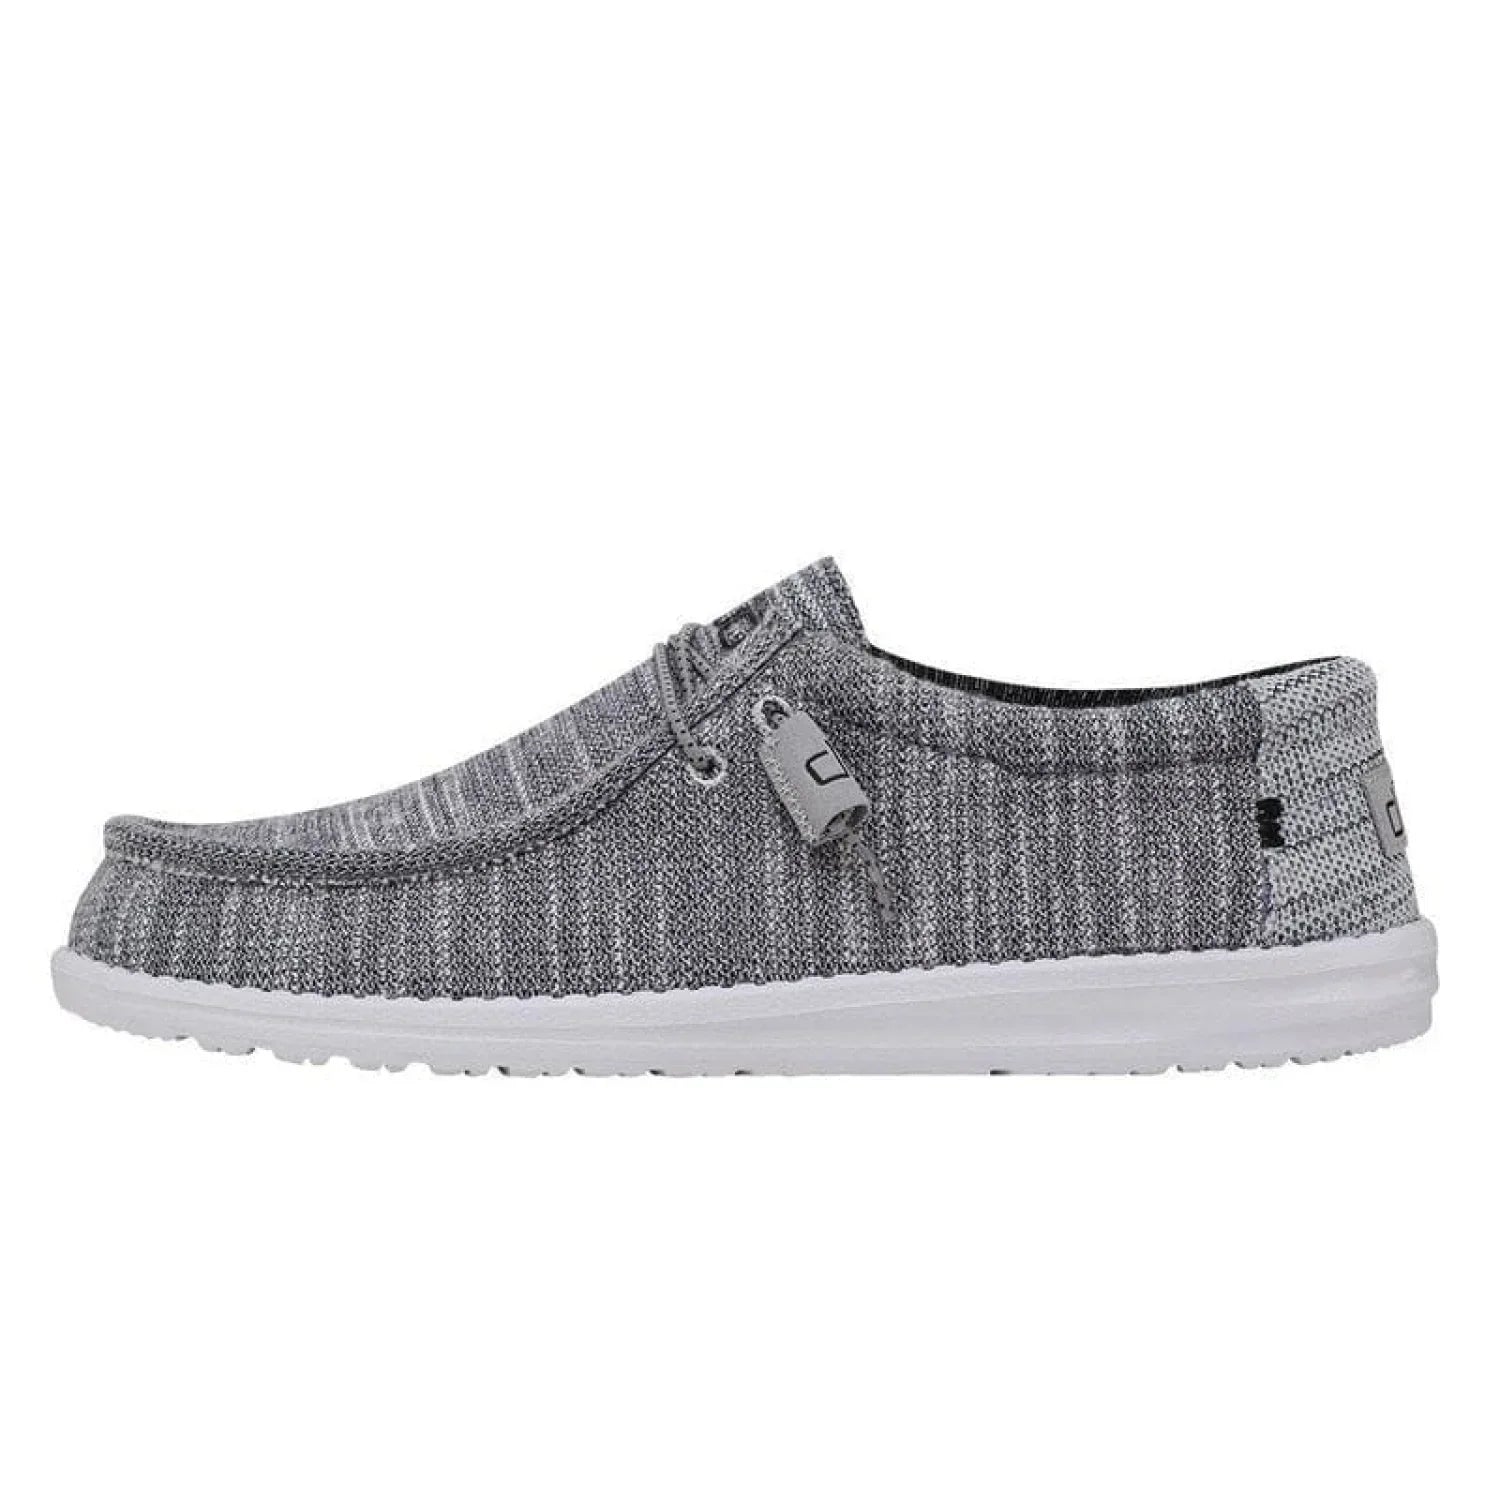 HEY DUDE MENS FOOTWEAR - MENS SHOES - MENS SHOES CASUAL Wally Stretch Mix GRANITE